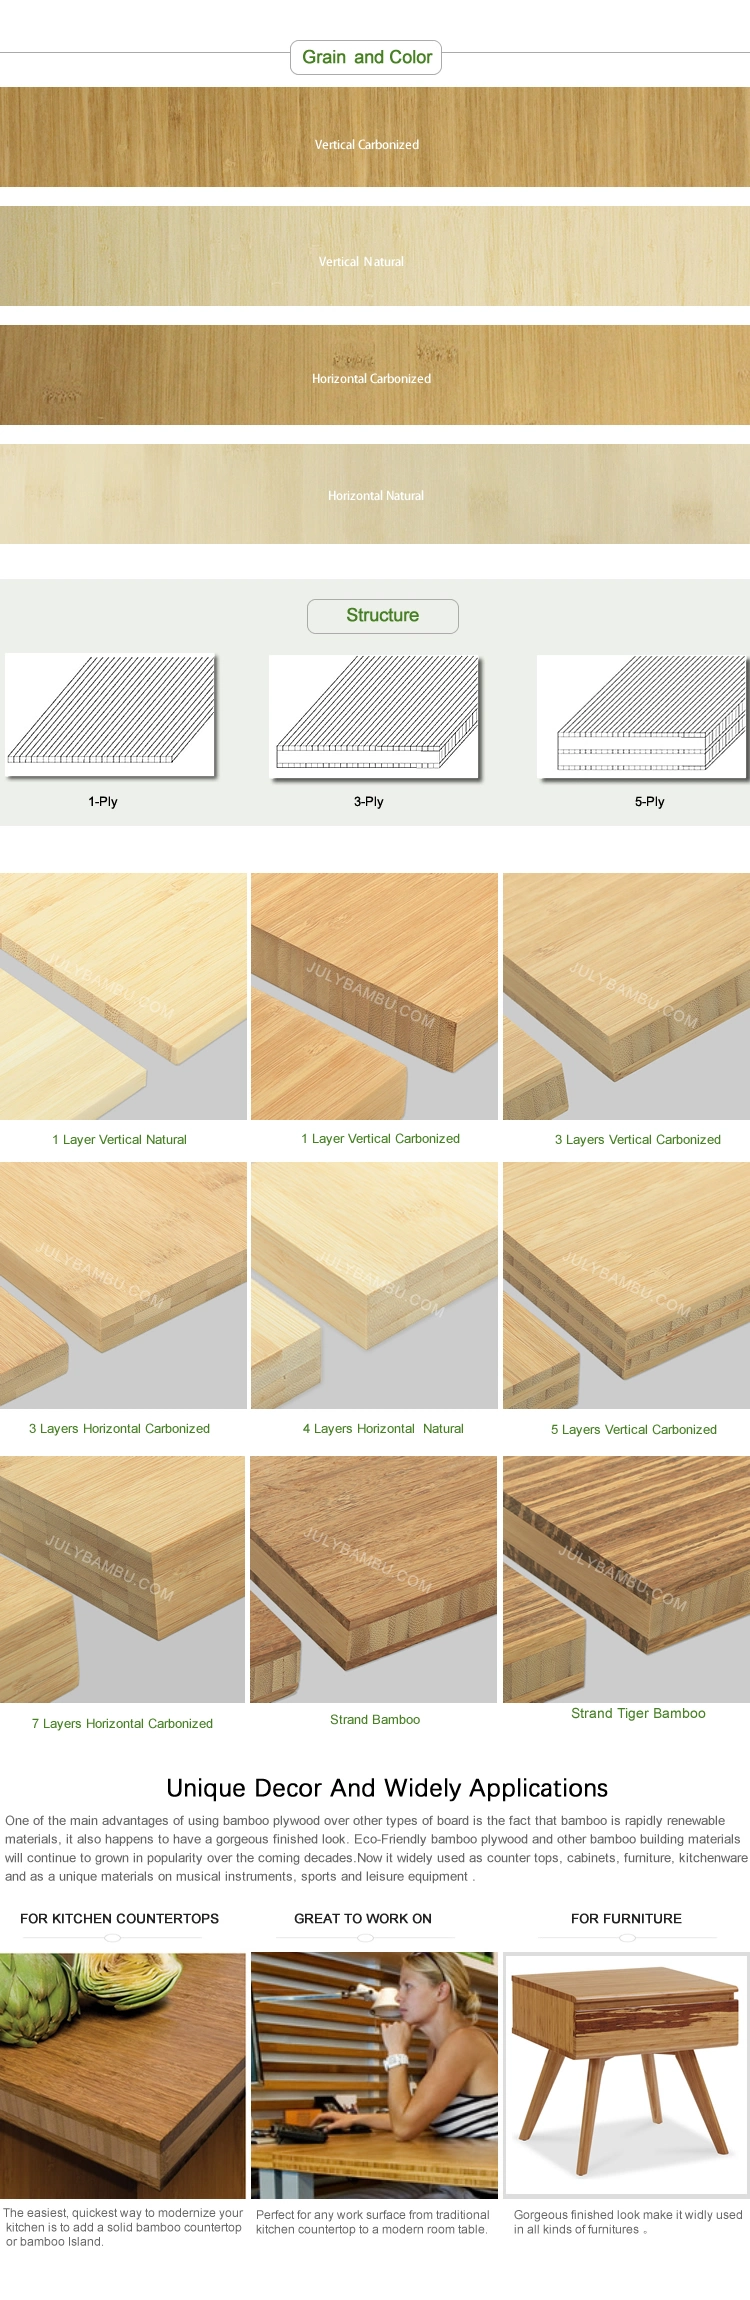 18mm 25mm Bamboo Lumber for Worktop for Kitchen, Also Can Use for Ceiling Panel